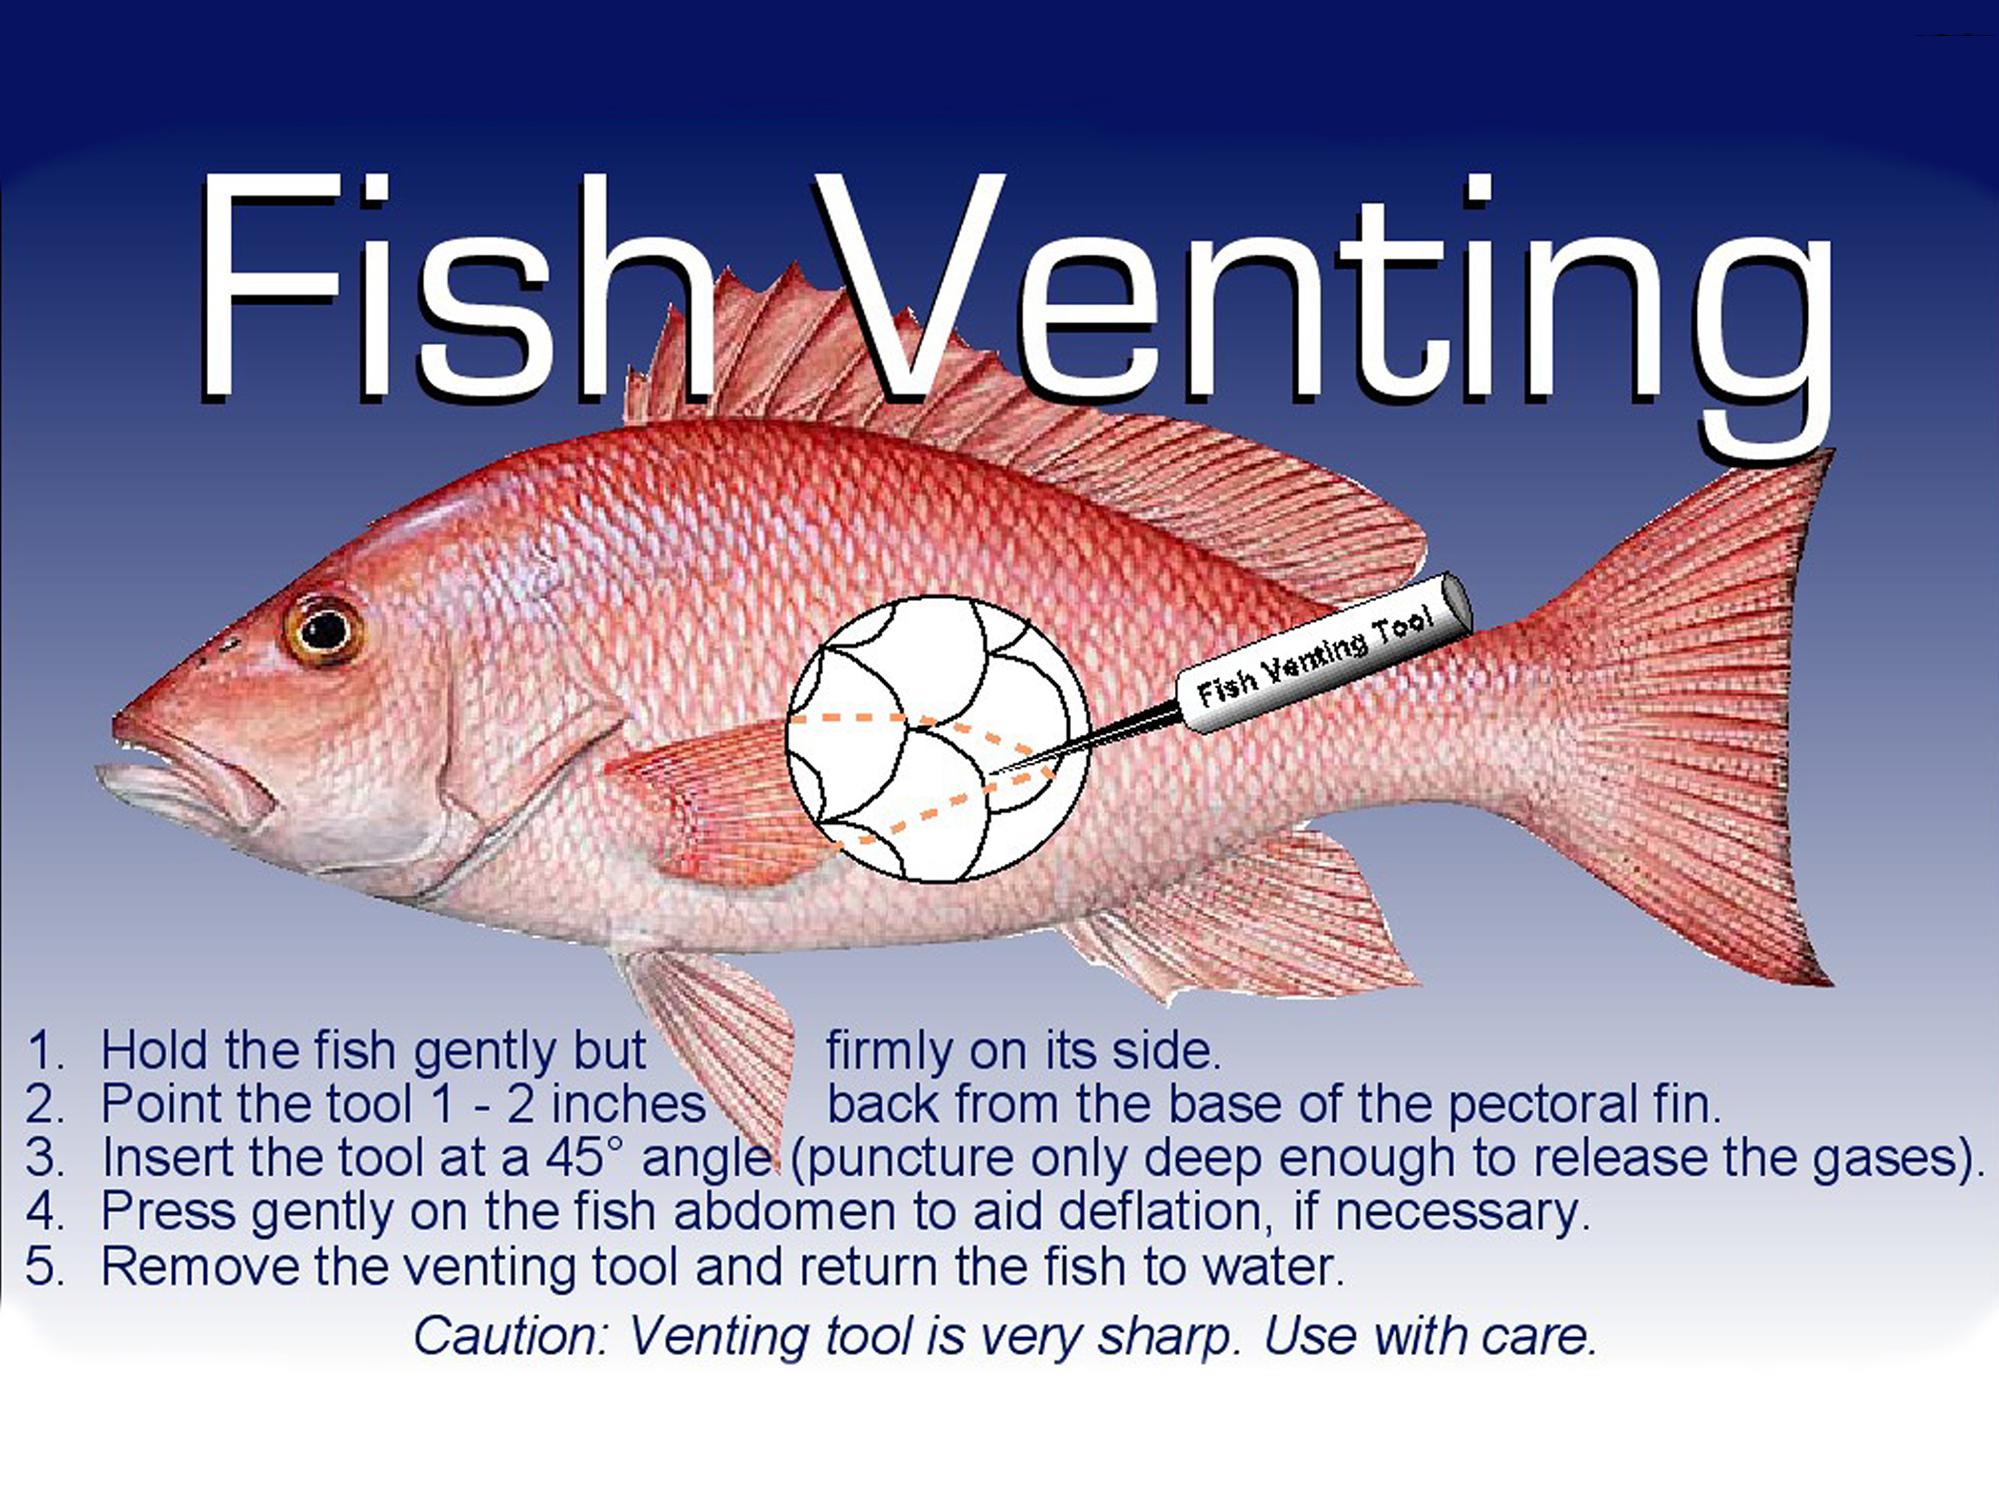 Side view of a fish with a needle device pointed between scales in the lower midsection. “Fish Venting Tool” is printed on the handle of the needle.